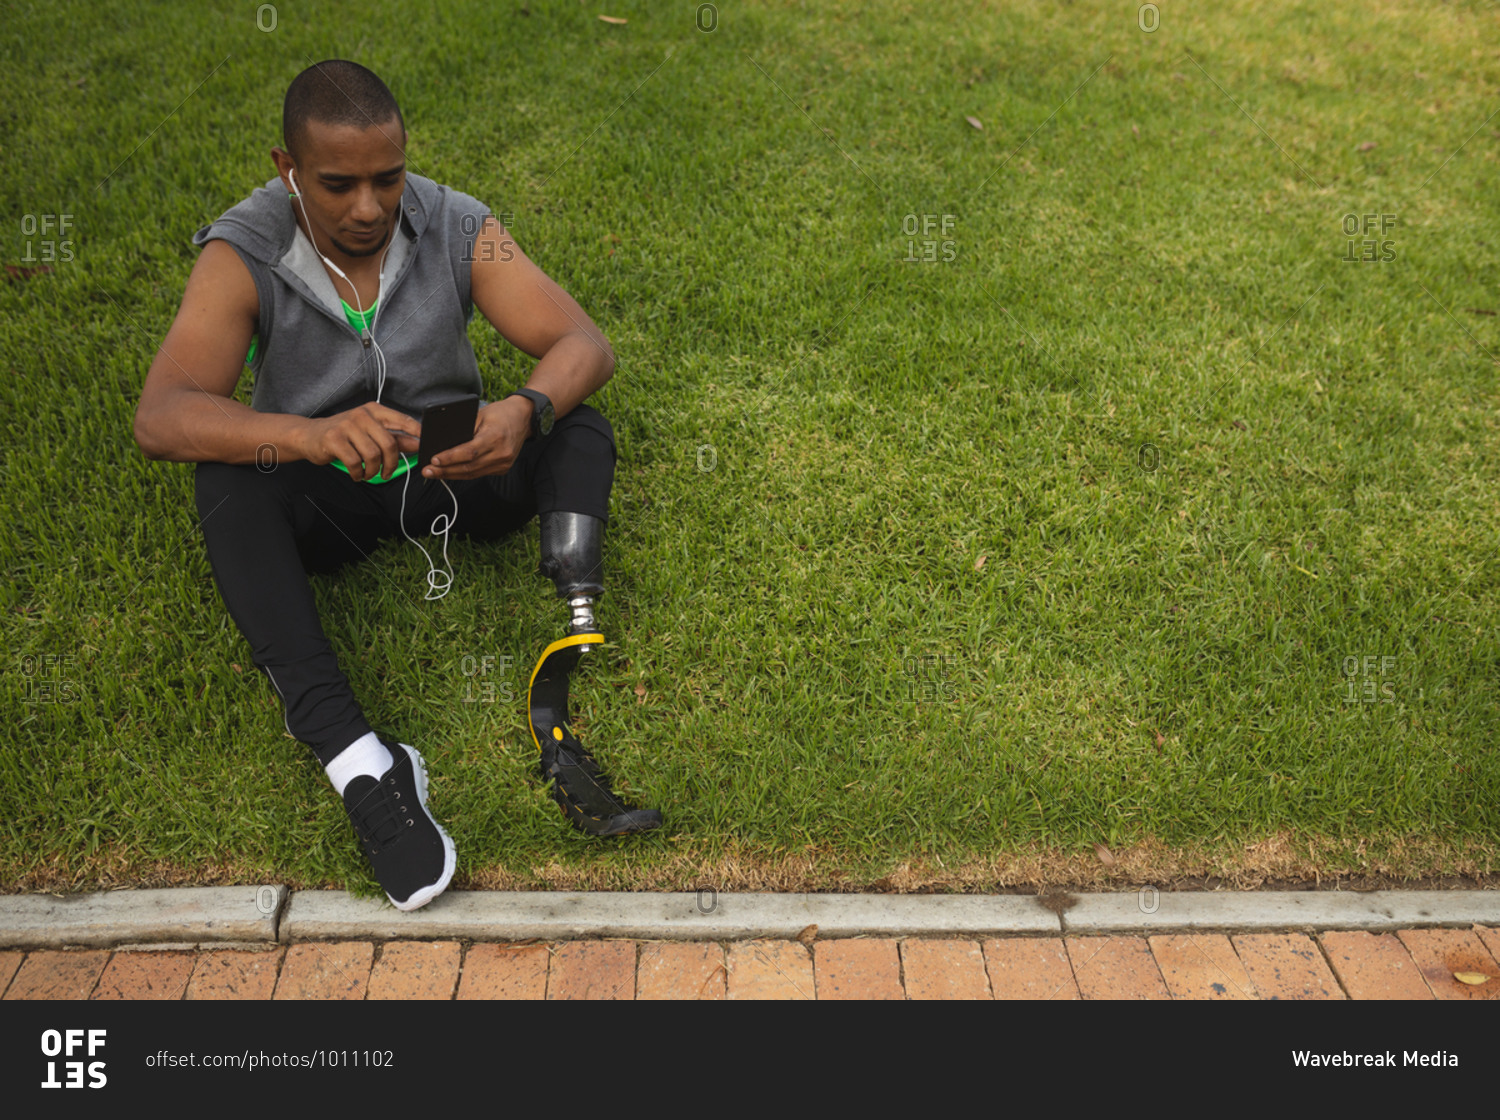 Disabled mixed race man with a prosthetic leg and running blade working out in a park, taking a break, sitting on grass using smartphone and wearing earphones. Fitness disability healthy lifestyle.